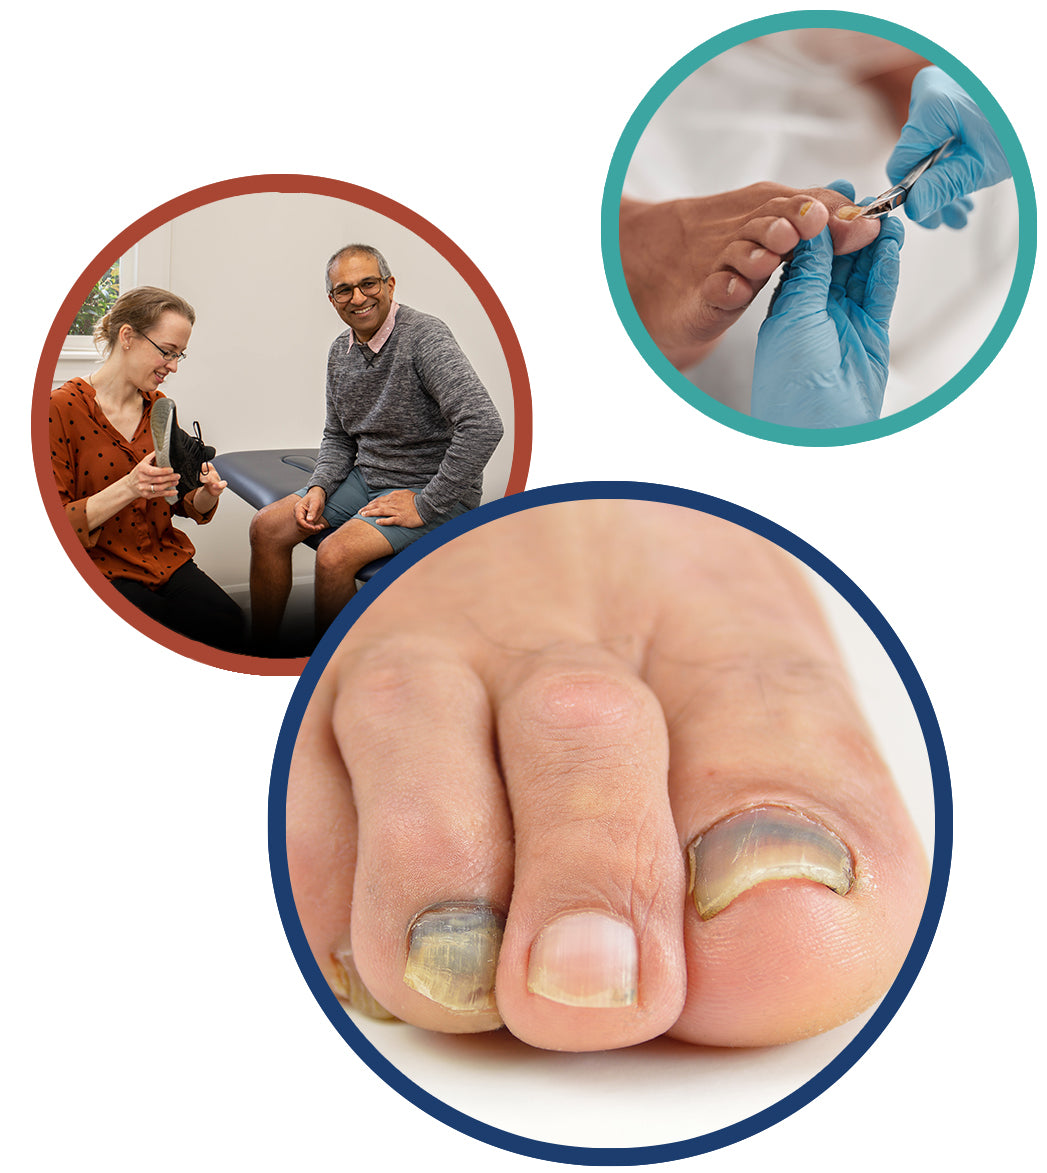 Why Is My Toenail Growing Thick & Discoloured? – merivale-podiatry